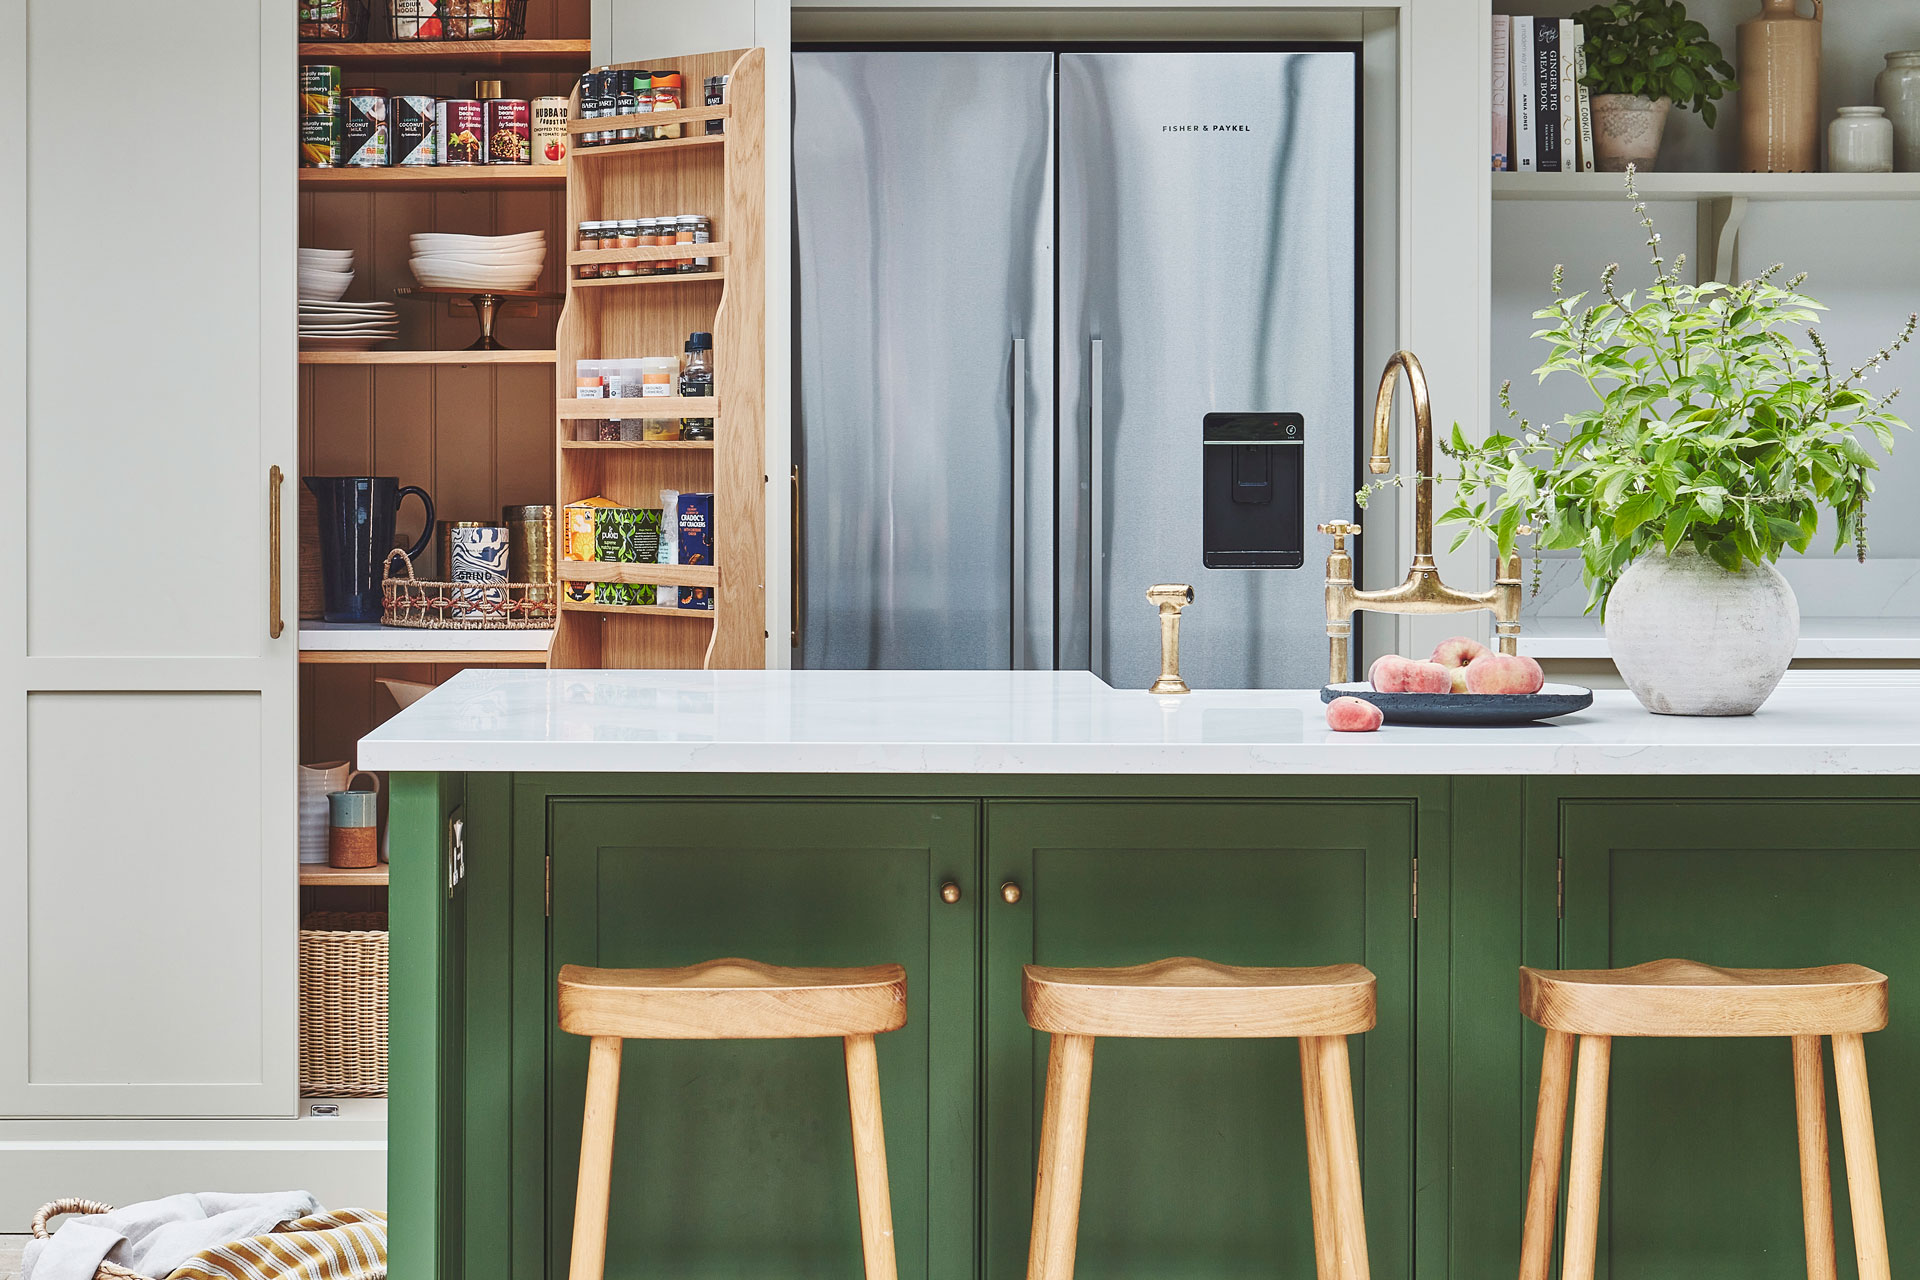 Forest green kitchen island with wooden stools and white countertops